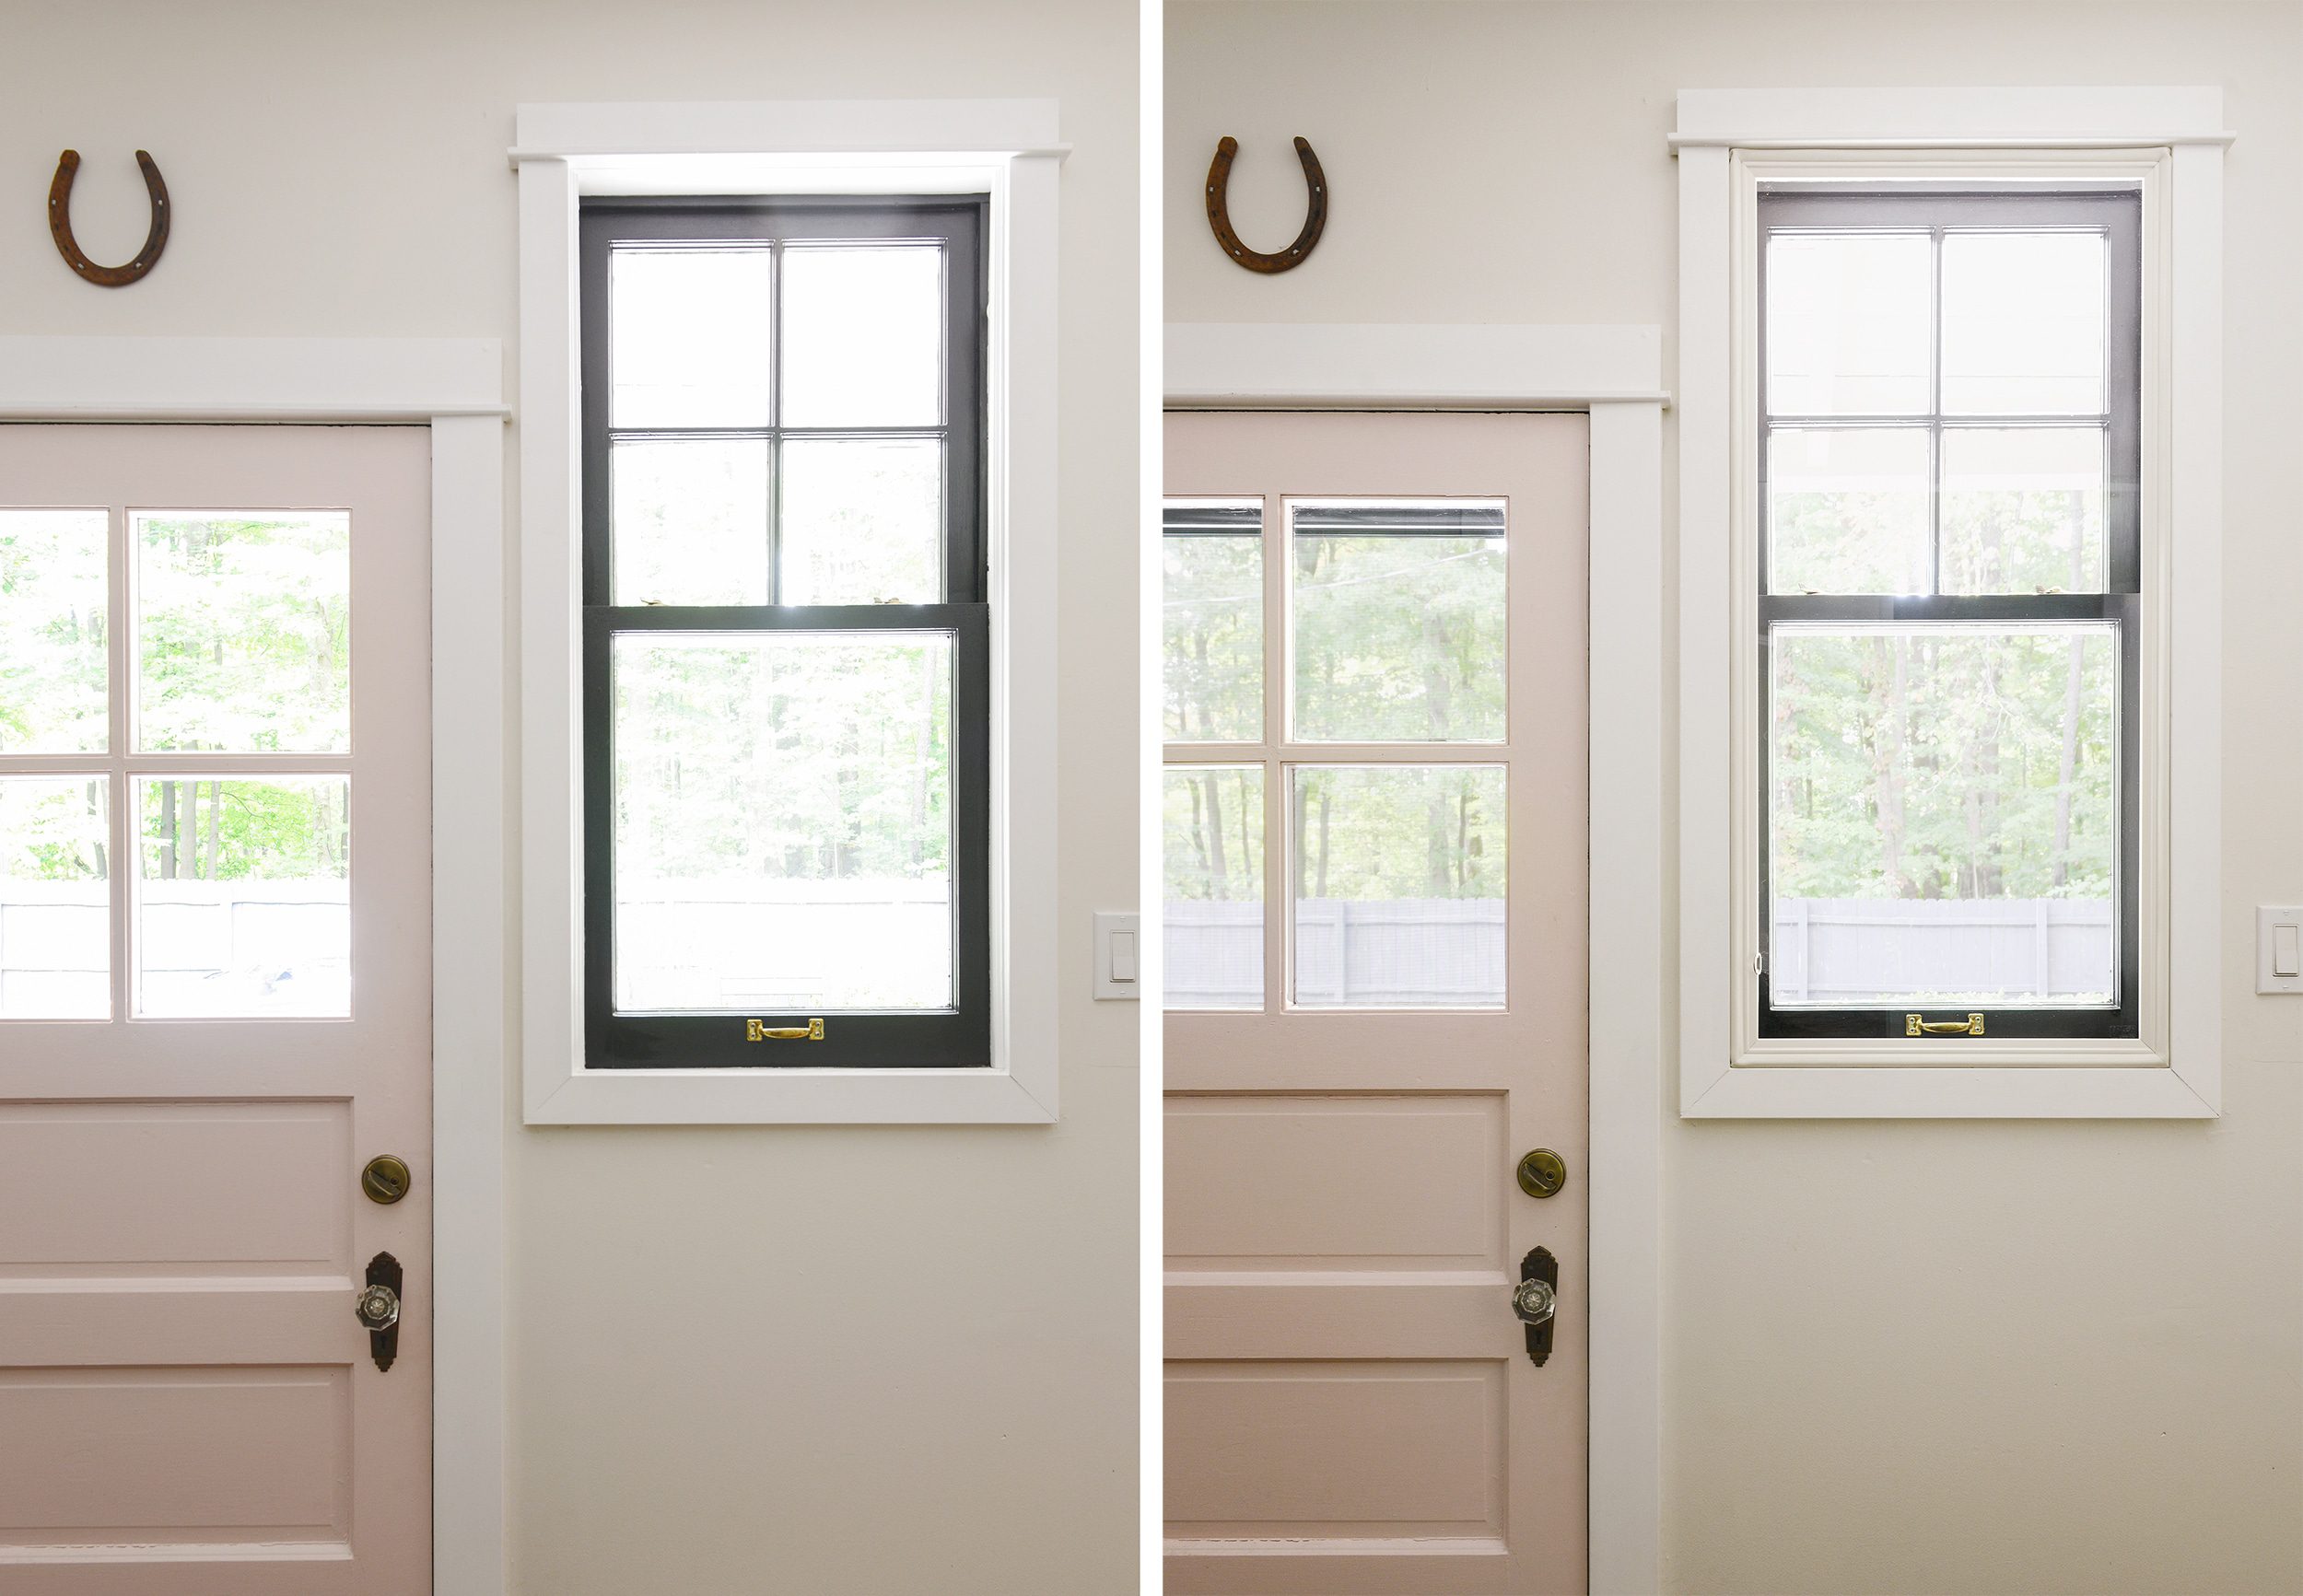 A mudroom with a pink front door, side by side comparison with vs. without Indow // Indow window inserts for comfortable, energy efficient homes via Yellow Brick Home, in partnership with Indow